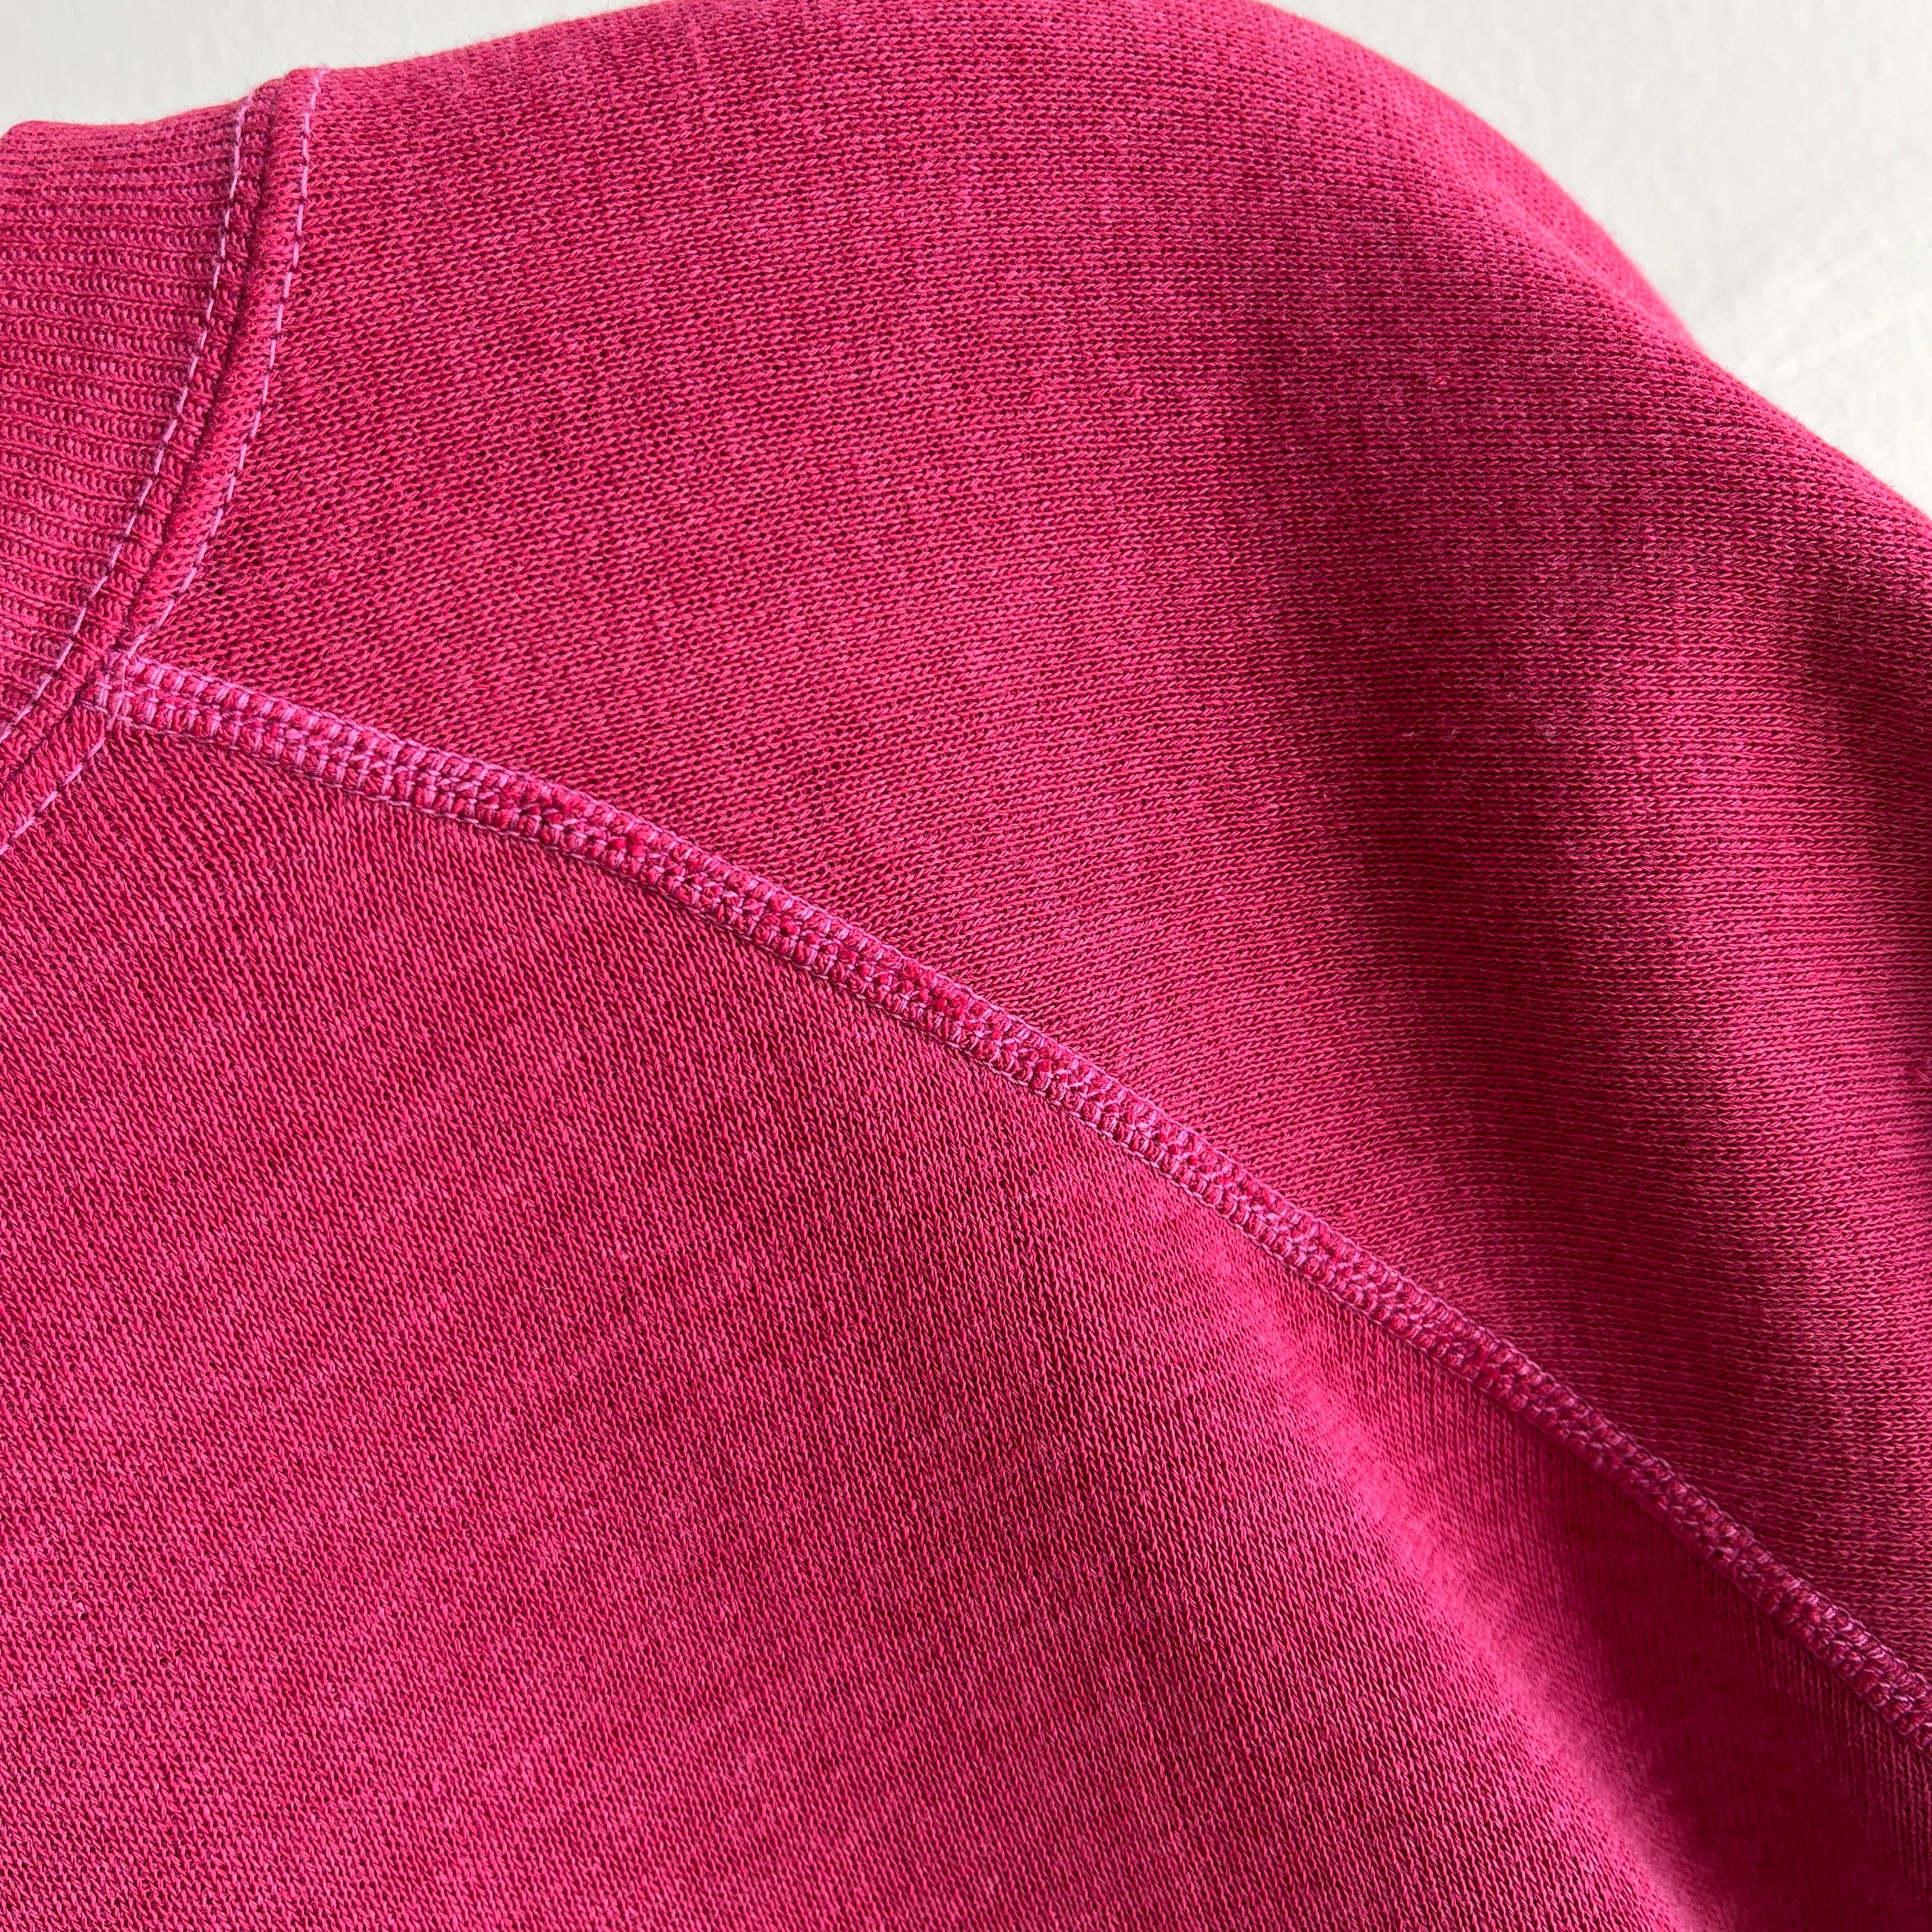 1970/80s Magenta Beauty with Contrast Stitching